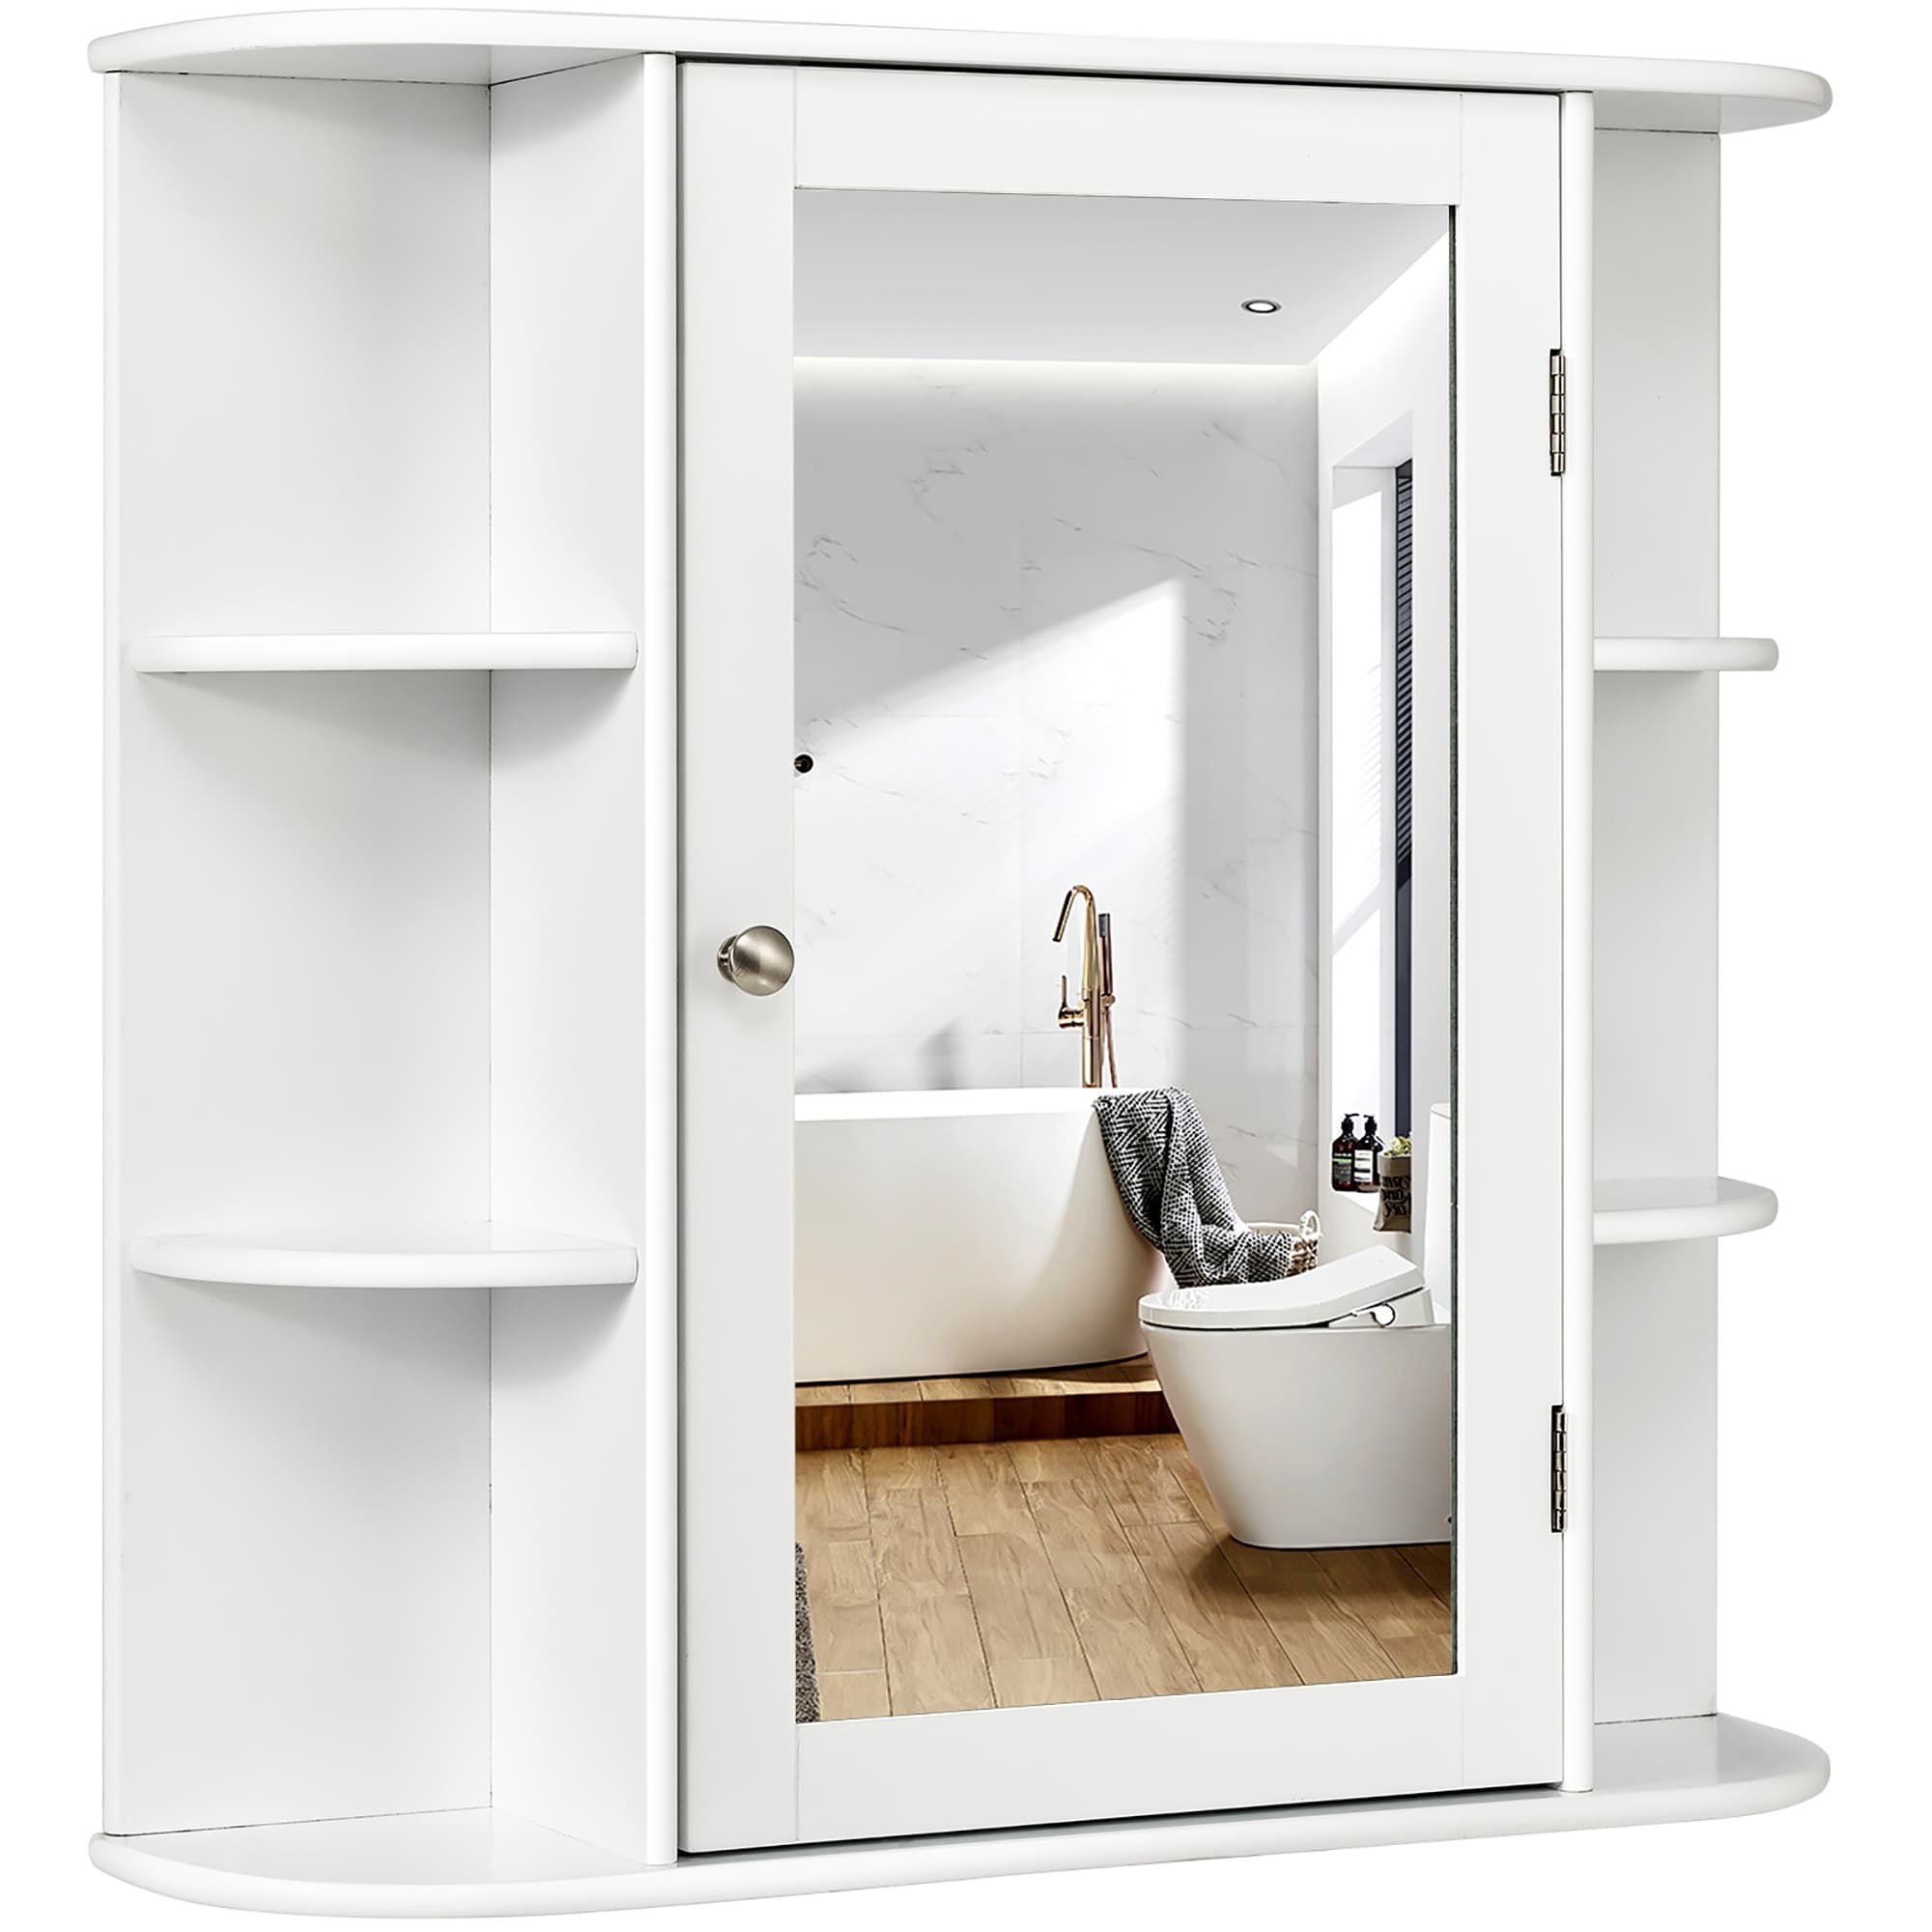 https://ak1.ostkcdn.com/images/products/is/images/direct/8468af69e05c4dac01d8e0de2a29922feed1883a/Wall-Mounted-Bathroom-Storage-Cabinet-Medicine-Cabinet-with-Mirror.jpg